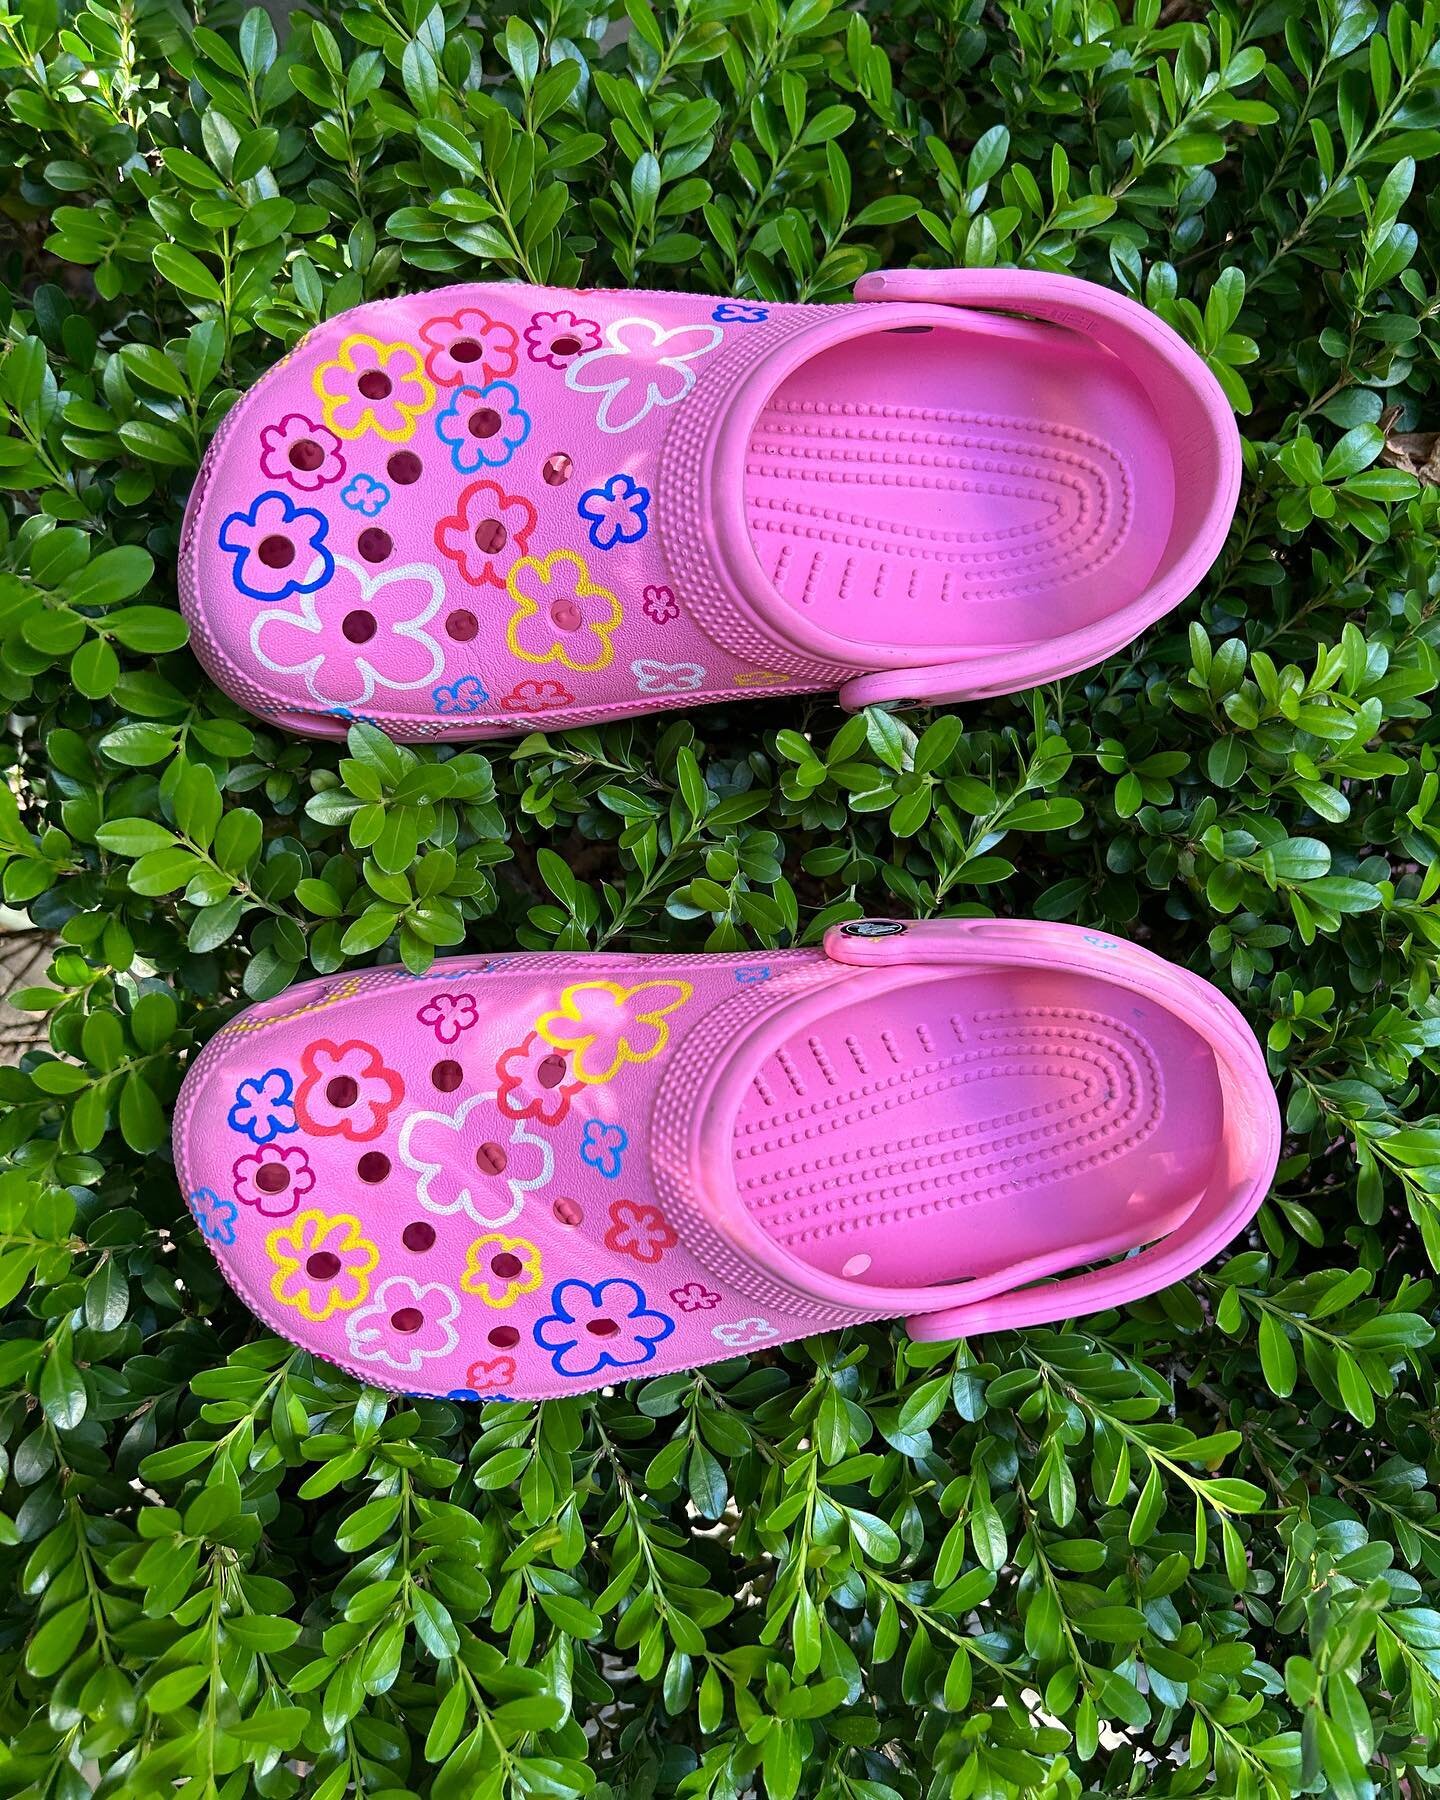 Bringing these hand painted crocs (by moi) to @art.mart___ tomorrow 5/7!